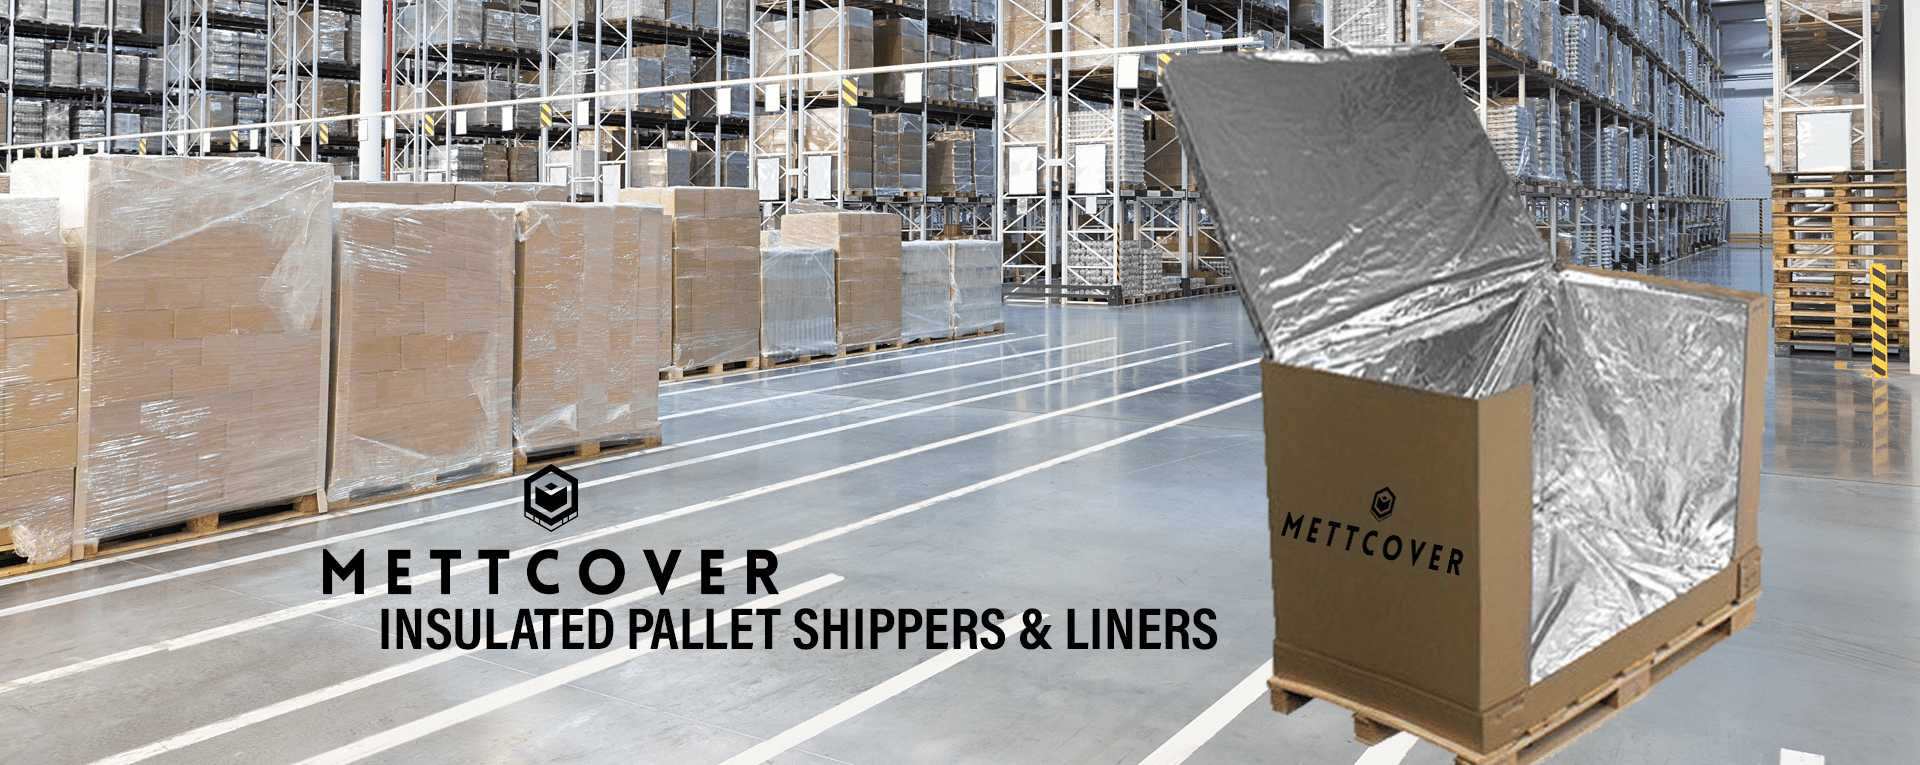 Mettcover Insulated Pallet Shippers & Liners